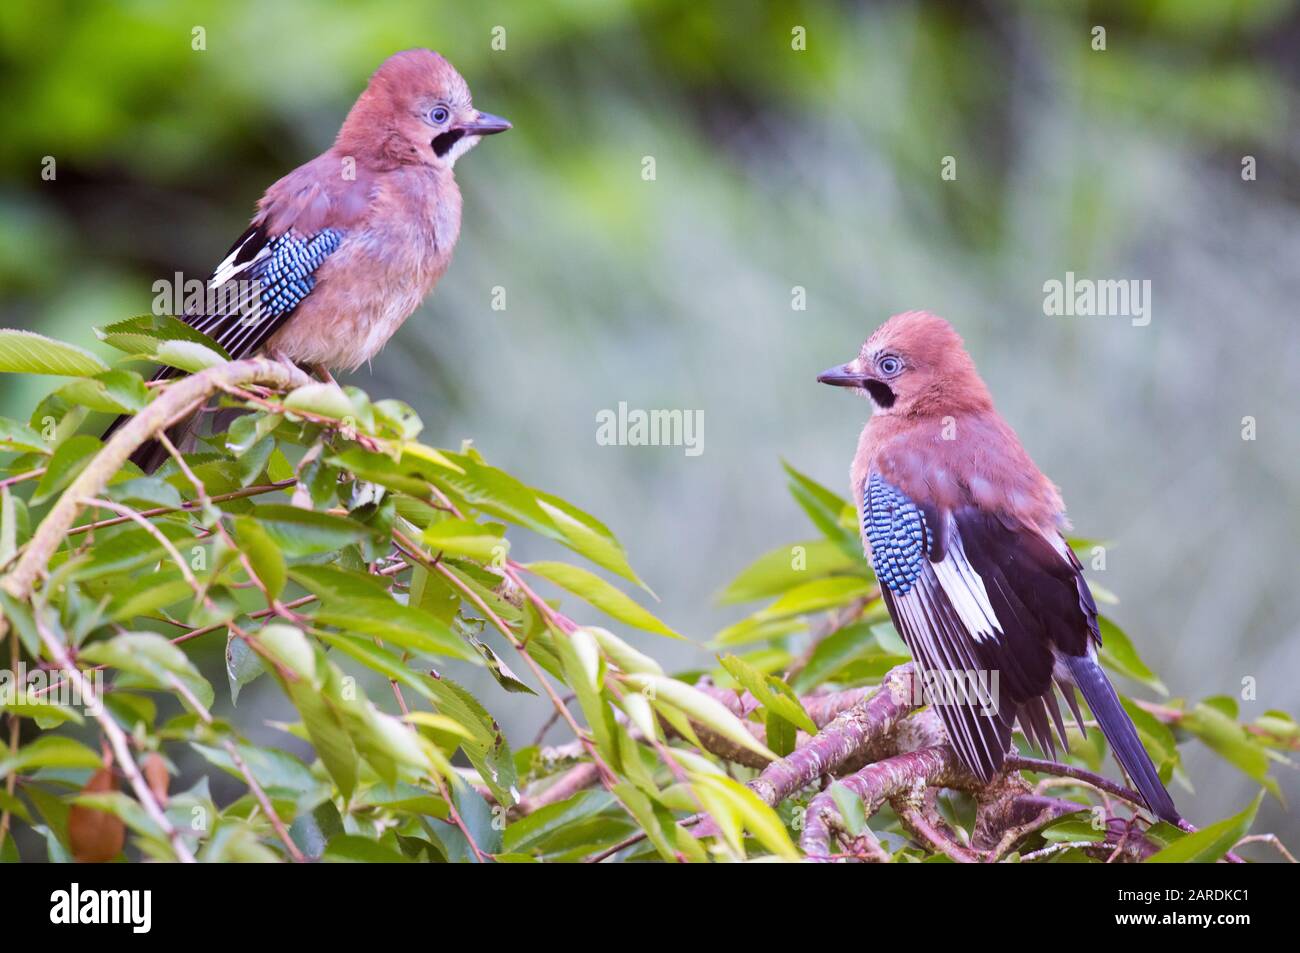 Jay, Garrulus glandarius. Two juvenile birds on the tree branch, their wings are black and white with a panel of distinctive electric-blue feathers Stock Photo